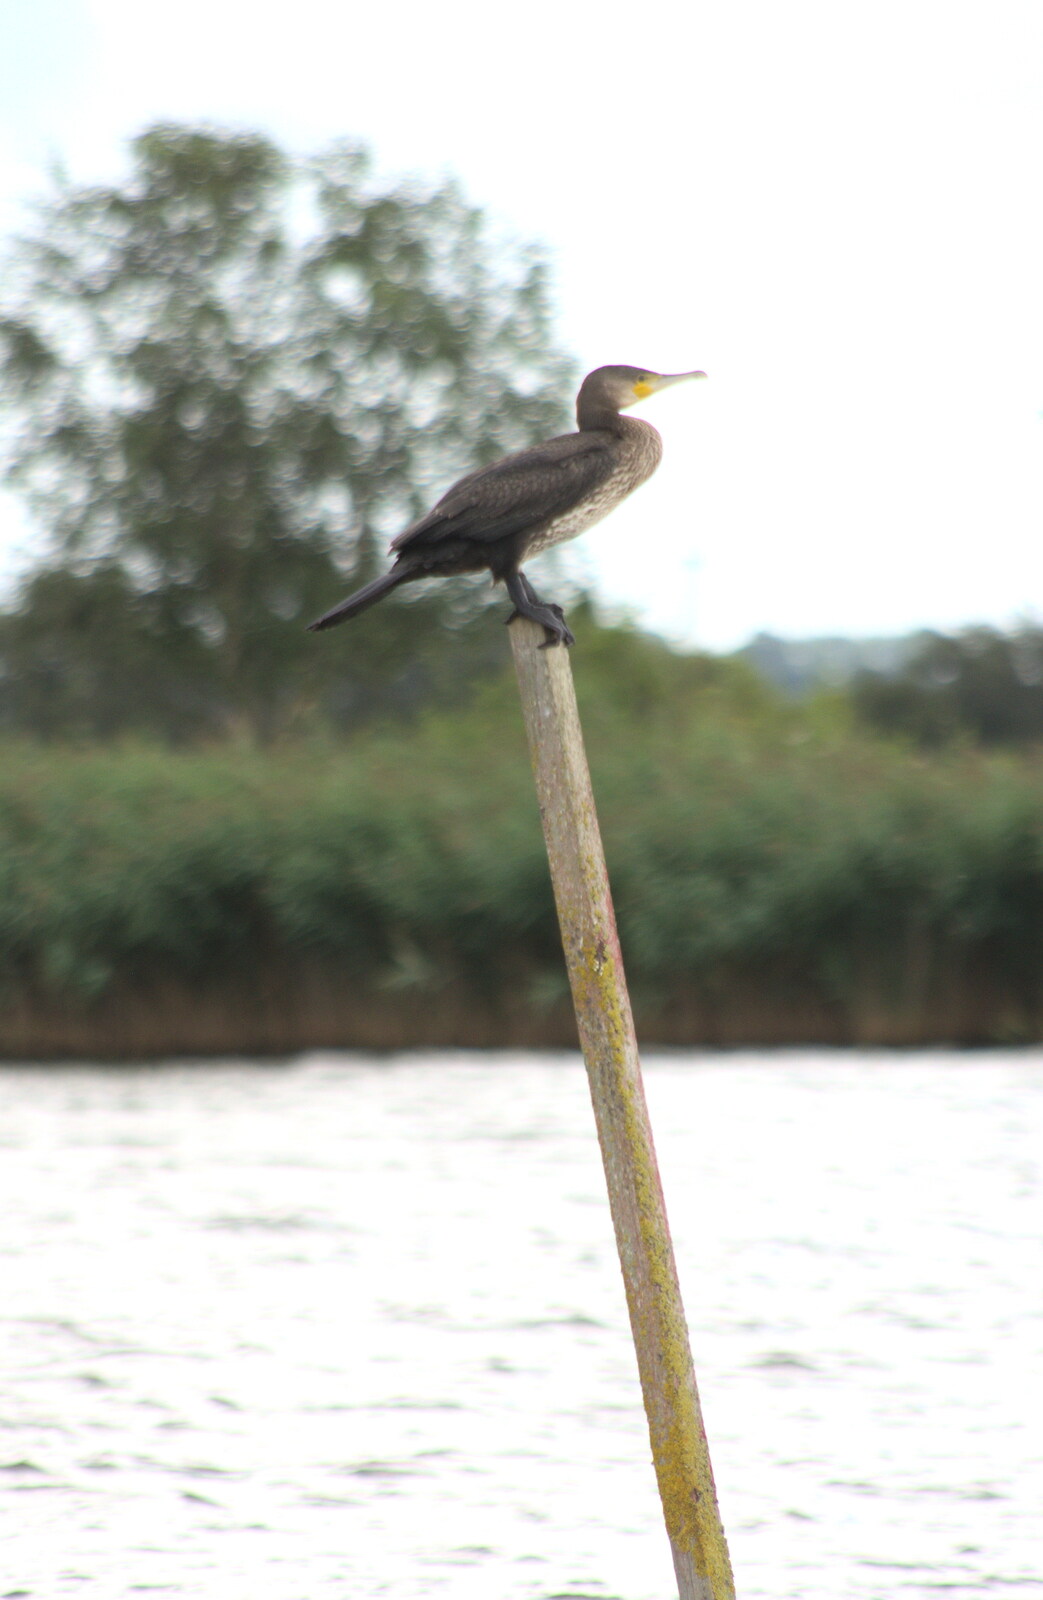 The cormorant on a post from A Trip to Waxham Sands,  Horsey, Norfolk - 27th August 2016